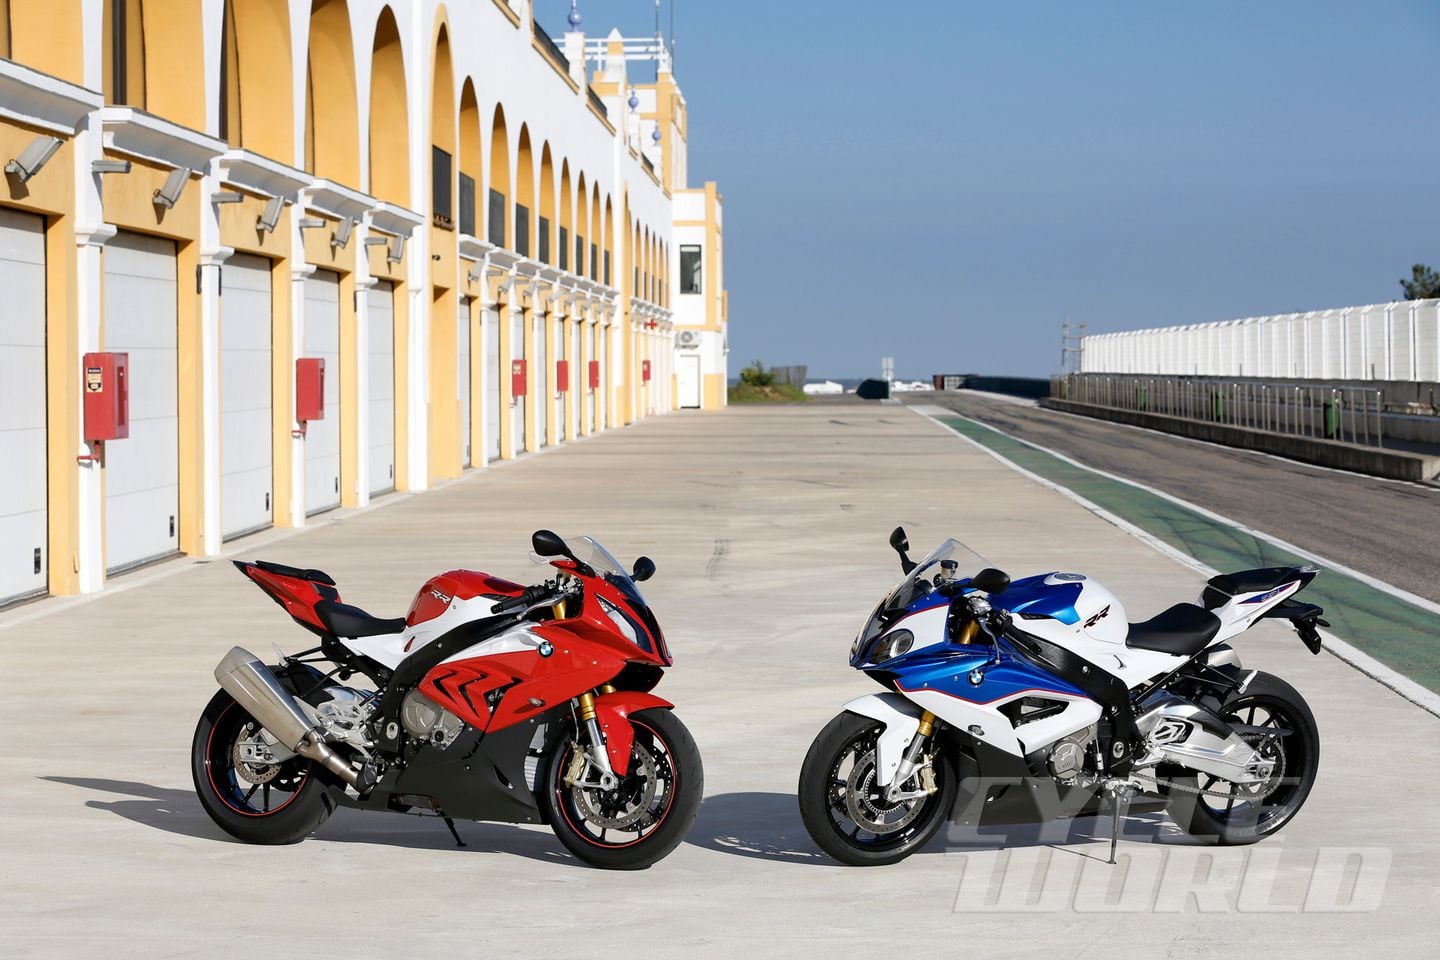 2015 BMW S1000RR- First Ride Sportbike Motorcycle Review- Photos- Specs